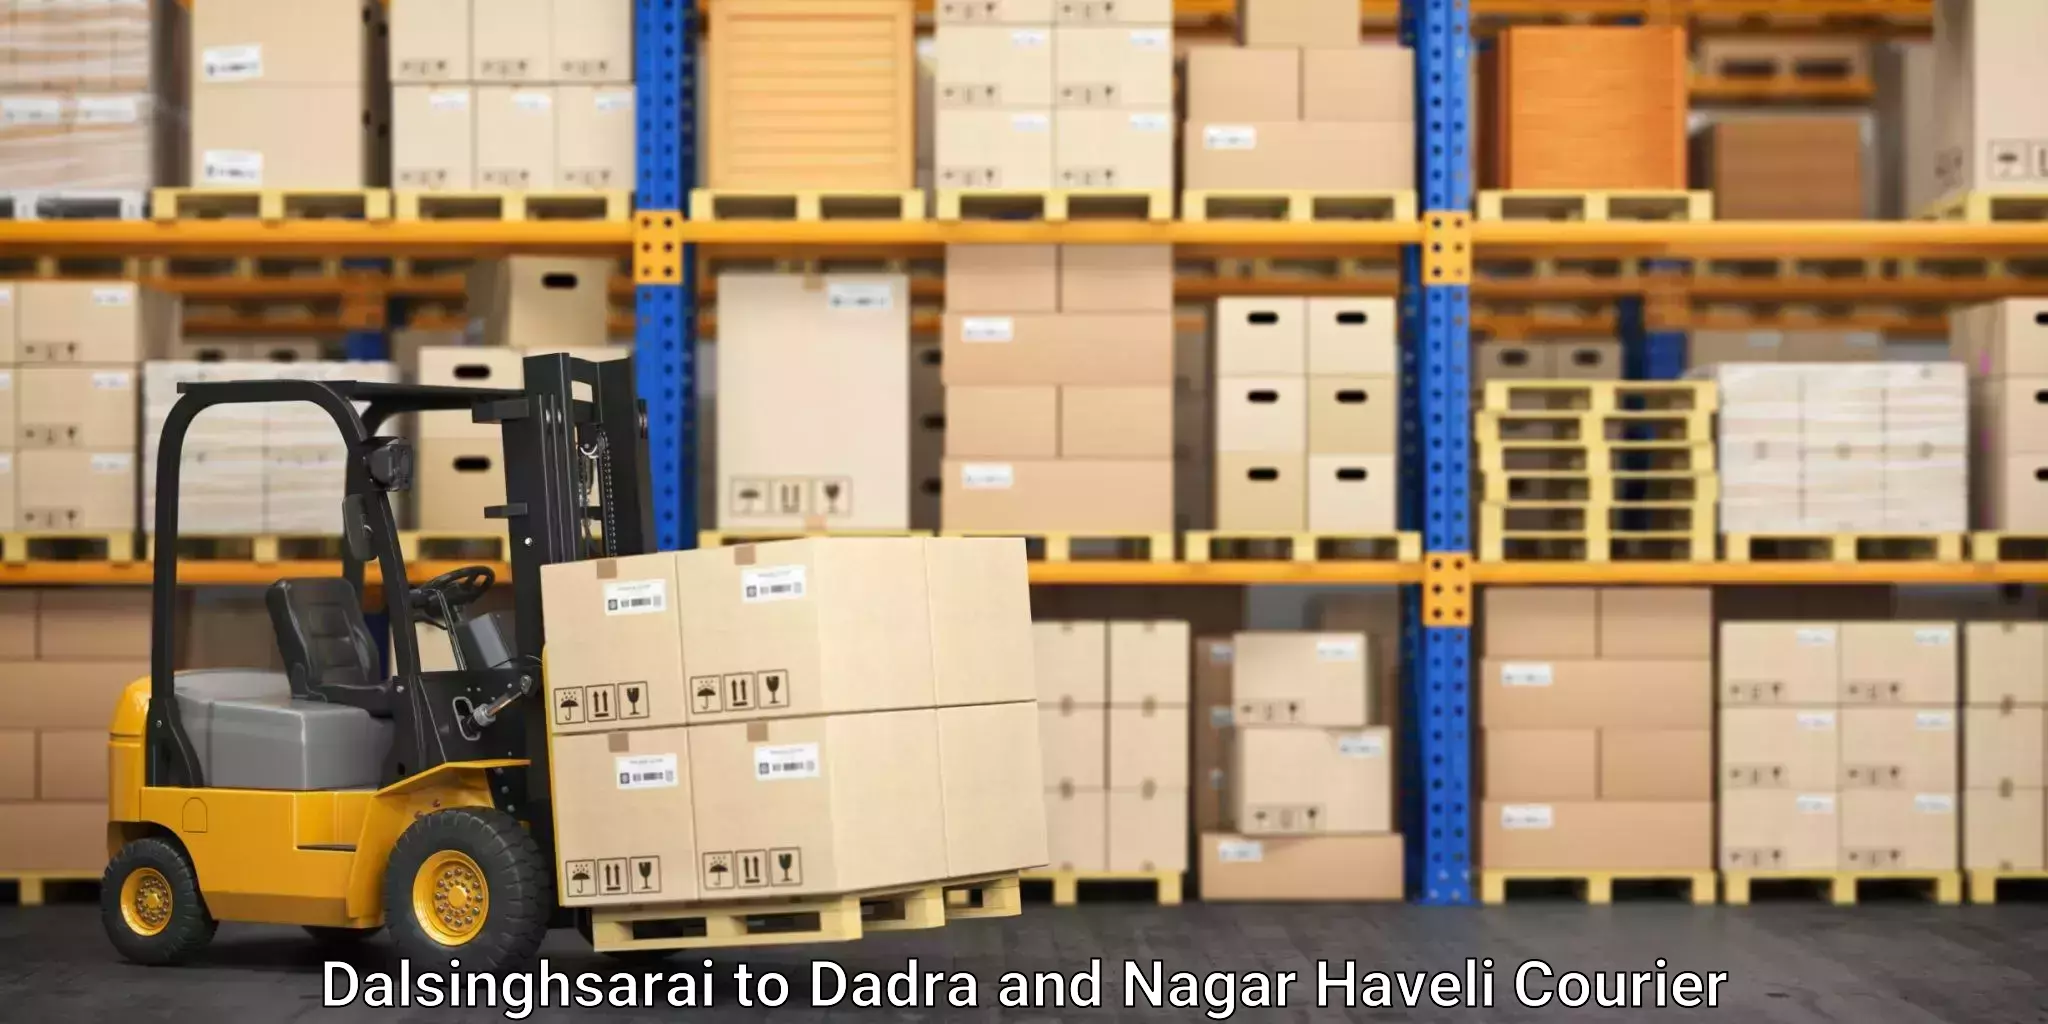 Long-distance moving services Dalsinghsarai to Dadra and Nagar Haveli